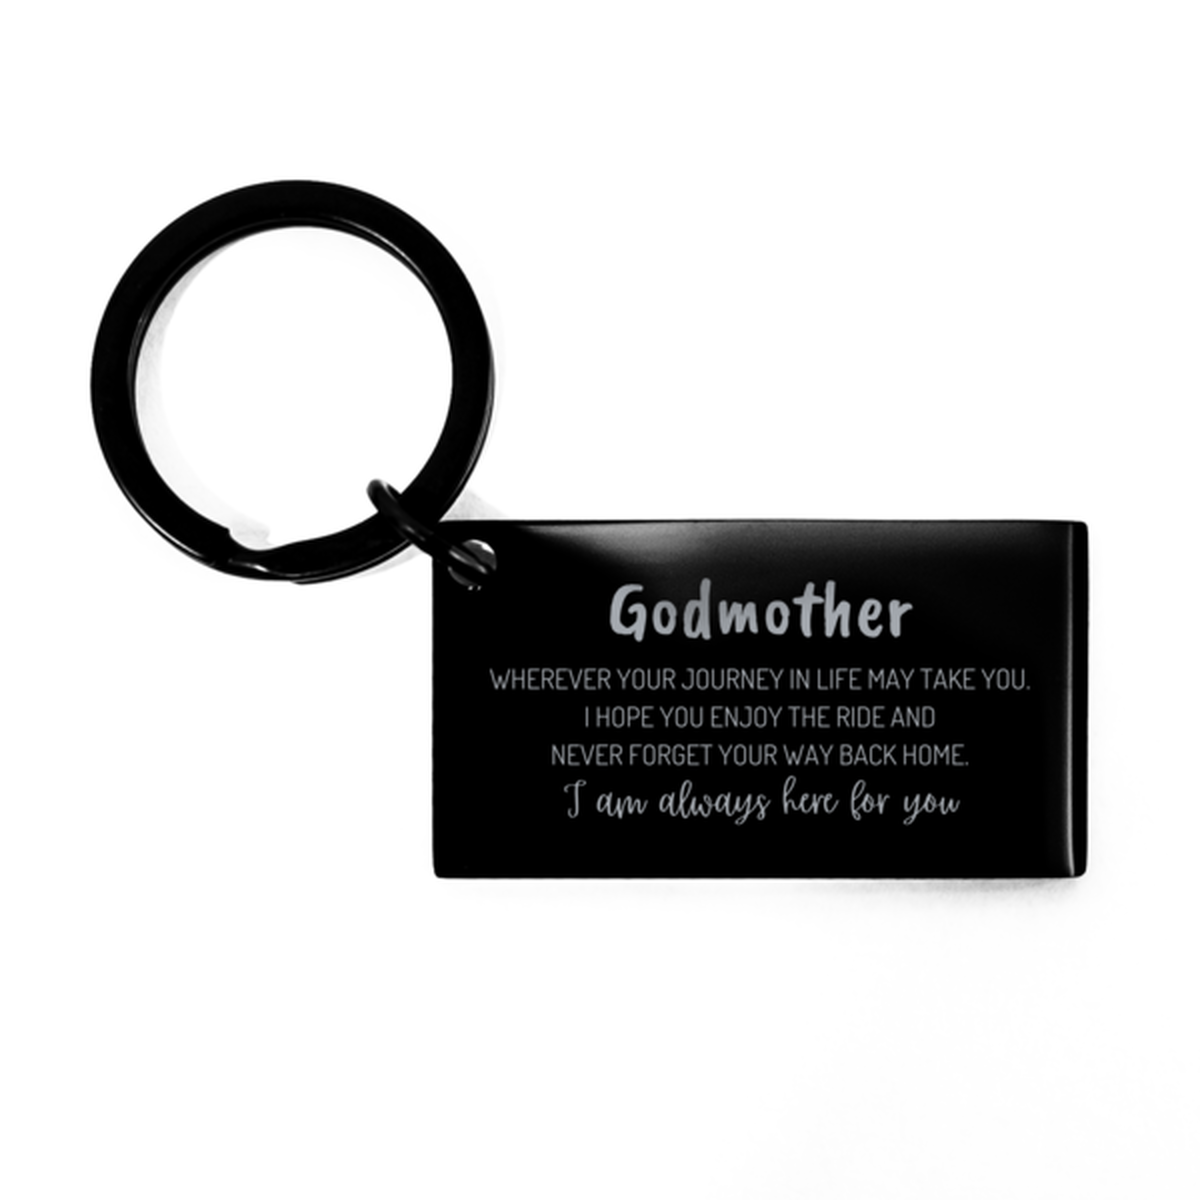 Godmother wherever your journey in life may take you, I am always here for you Godmother Keychain, Awesome Christmas Gifts For Godmother, Godmother Birthday Gifts for Men Women Family Loved One